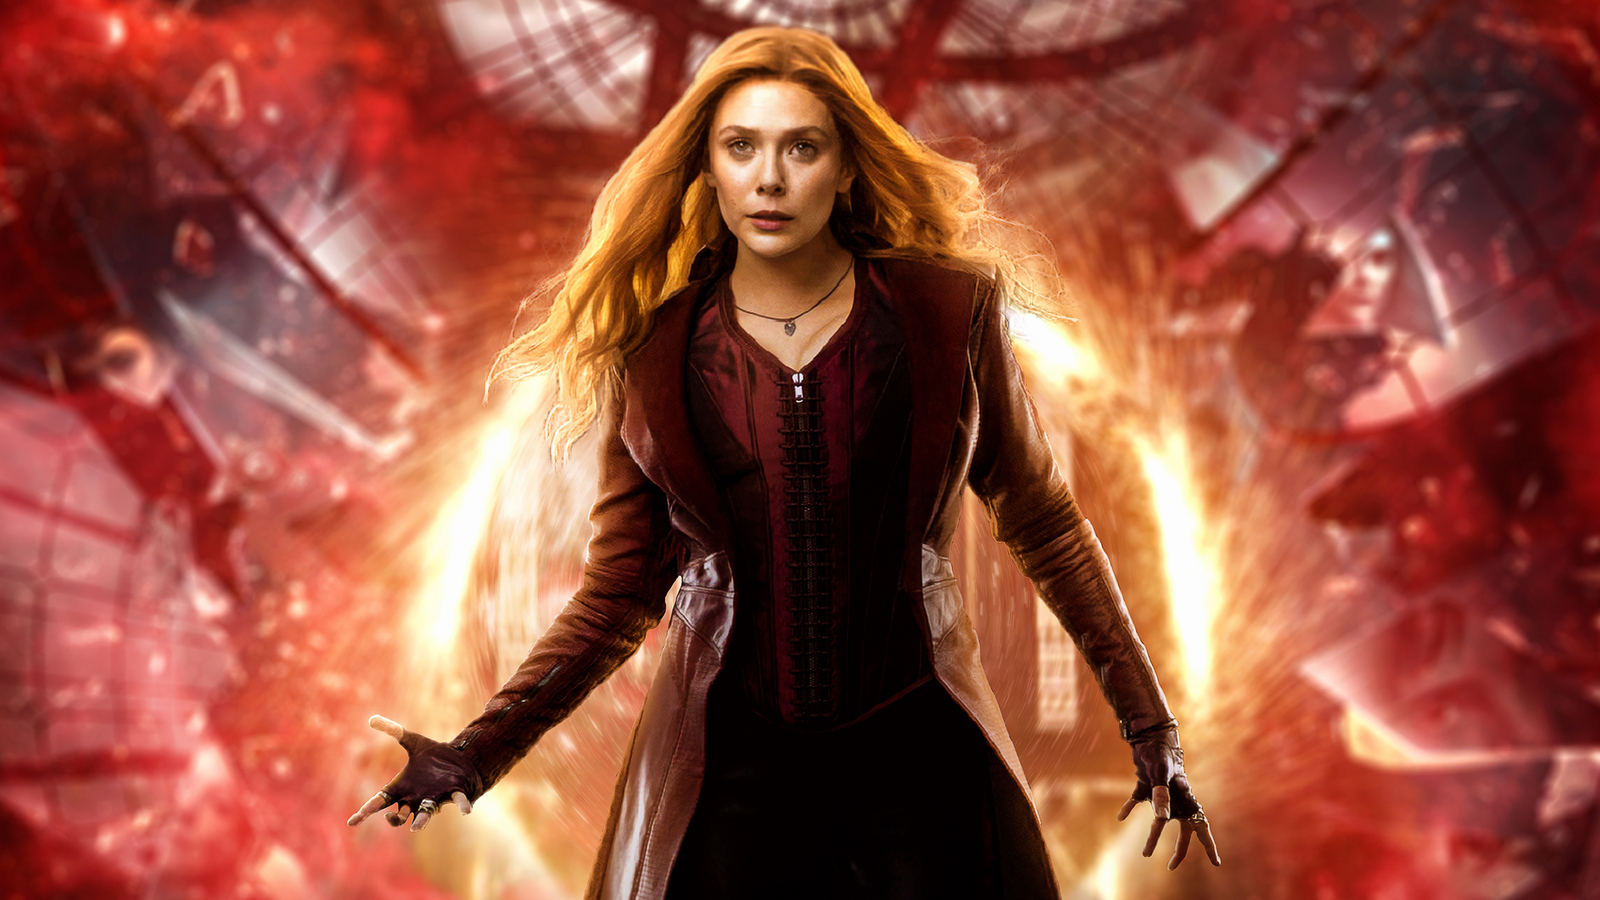 2022-doctor-strange-in-the-multiverse-of-madness-scarlet-witch-4k-aw.jpg